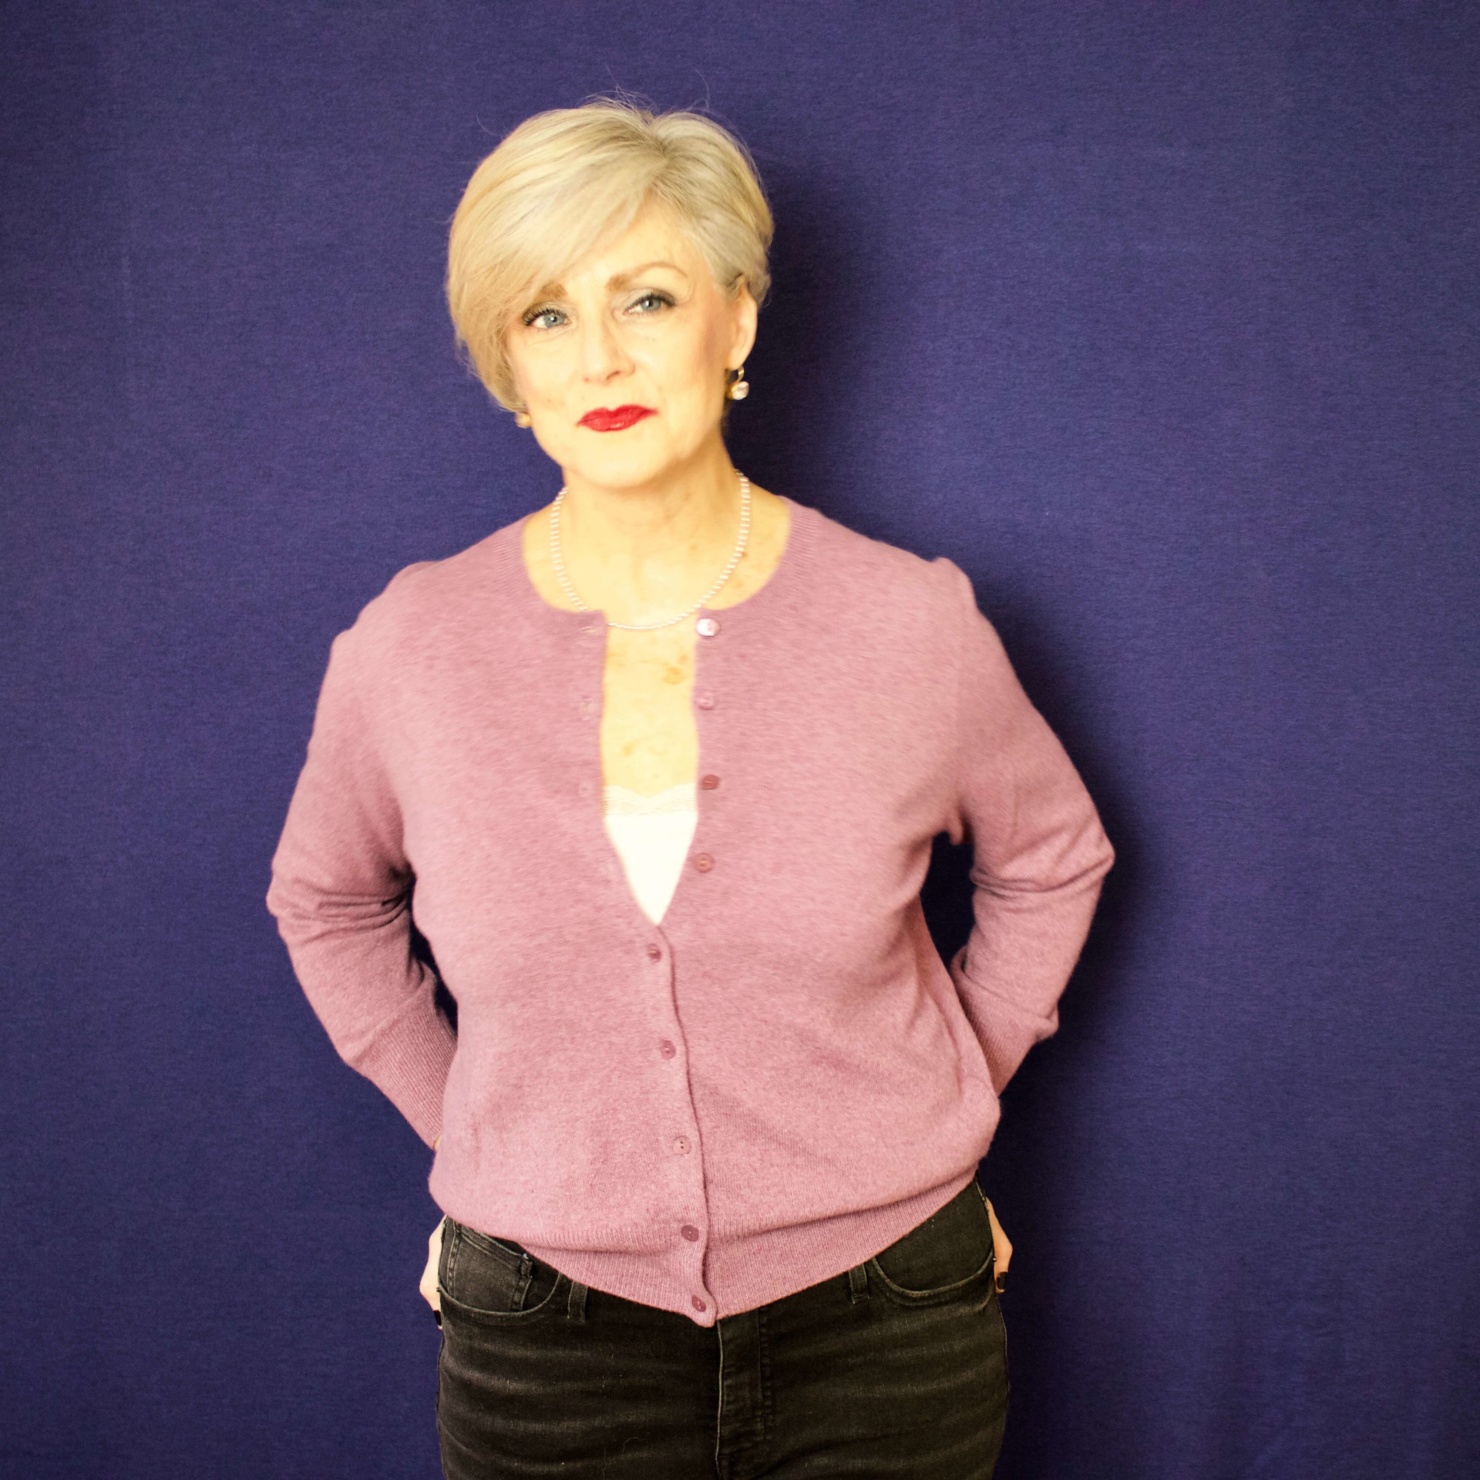 beth from Style at a Certain Age wears a cashmere cardigan from Marks & Spencer